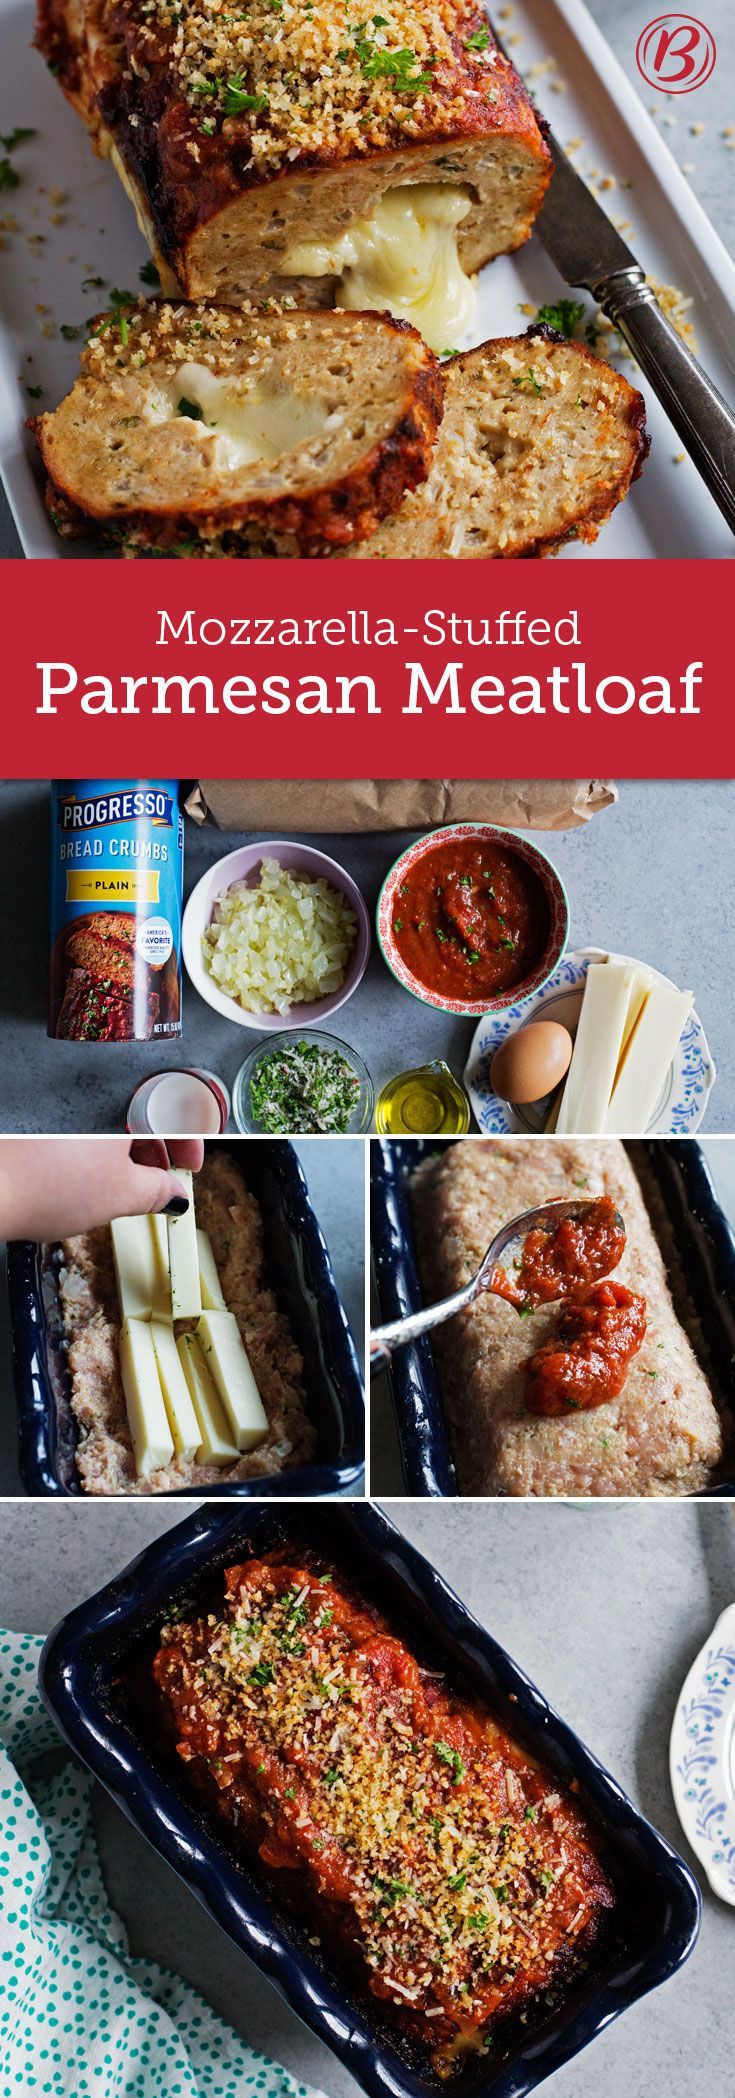 All the classic flavors of chicken Parmesan come together in this meatloaf stuffed with gooey mozzarella cheese and topped with